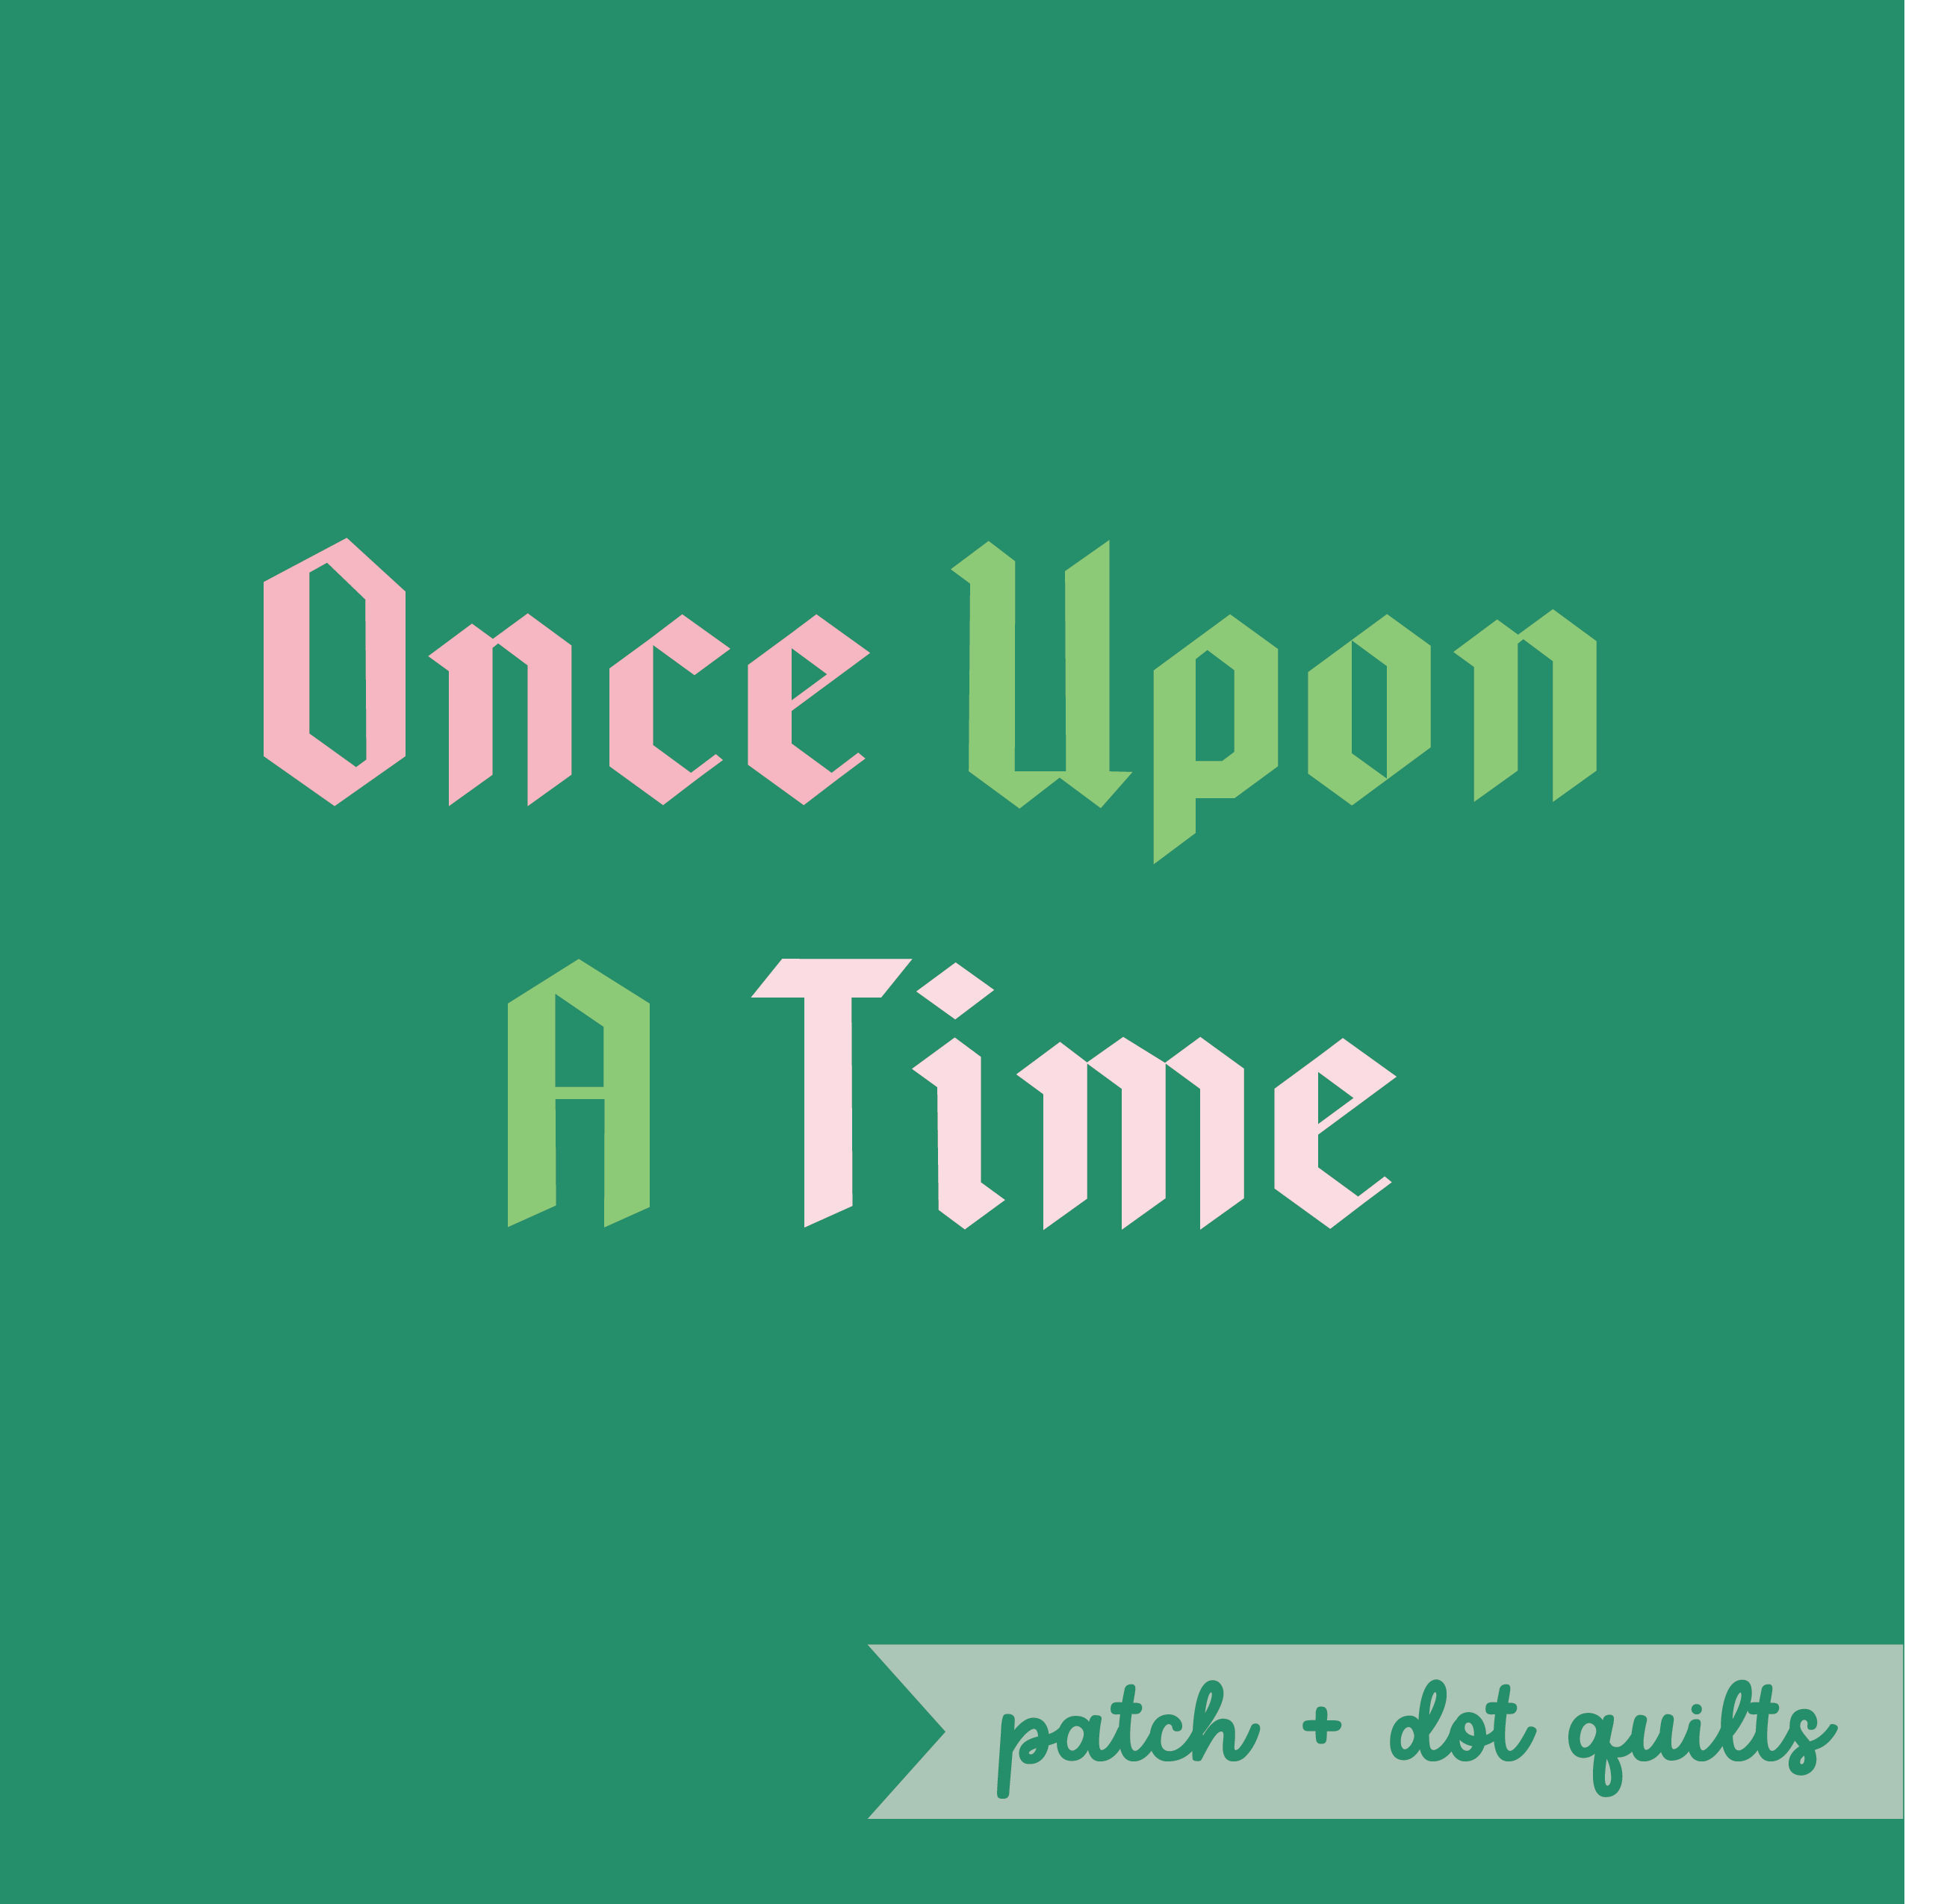 Once Upon a Time quilt